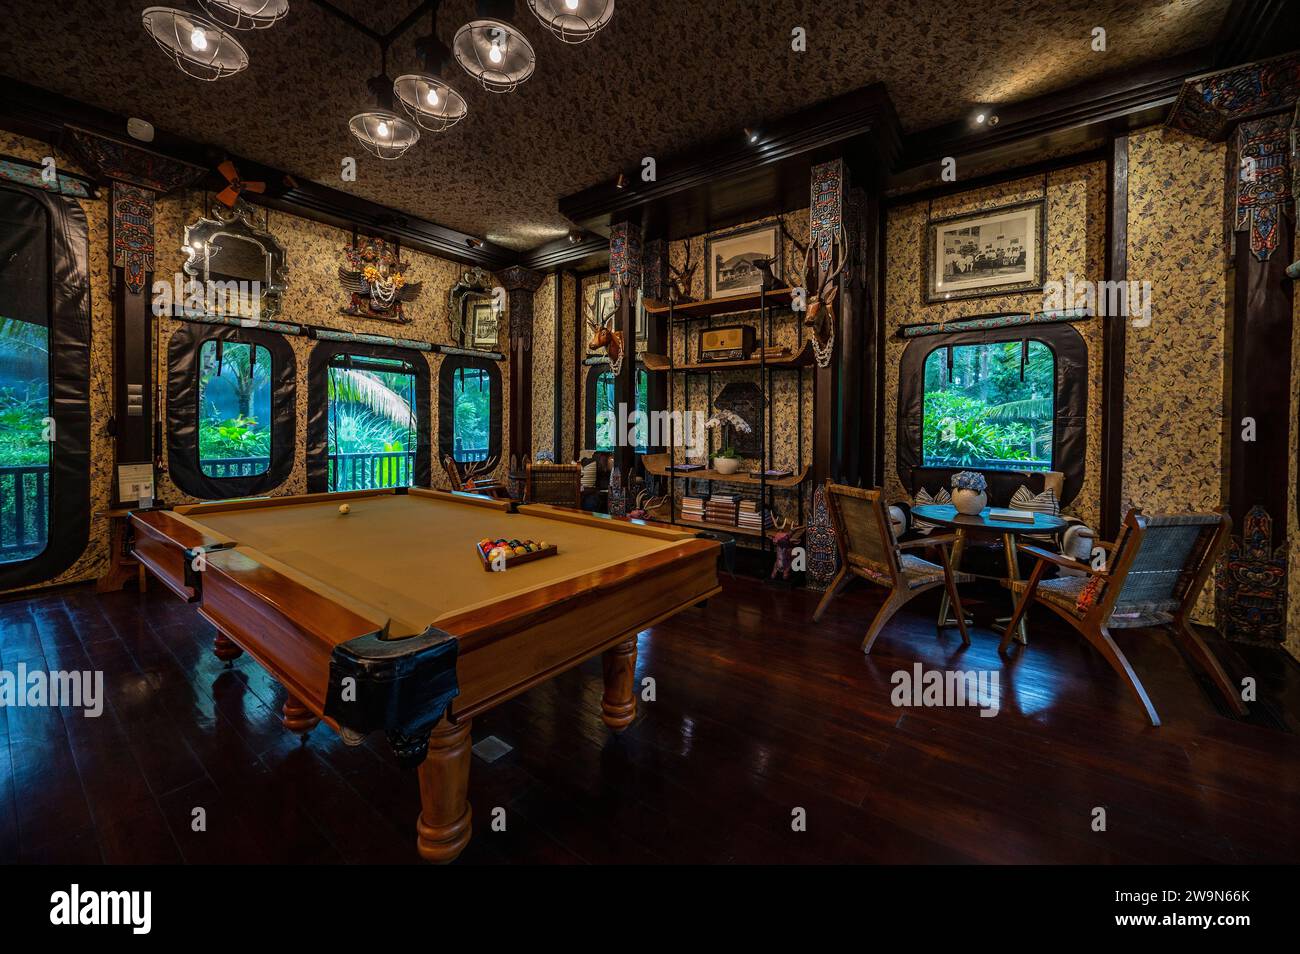 pool table at luxury resort in Bali Stock Photo